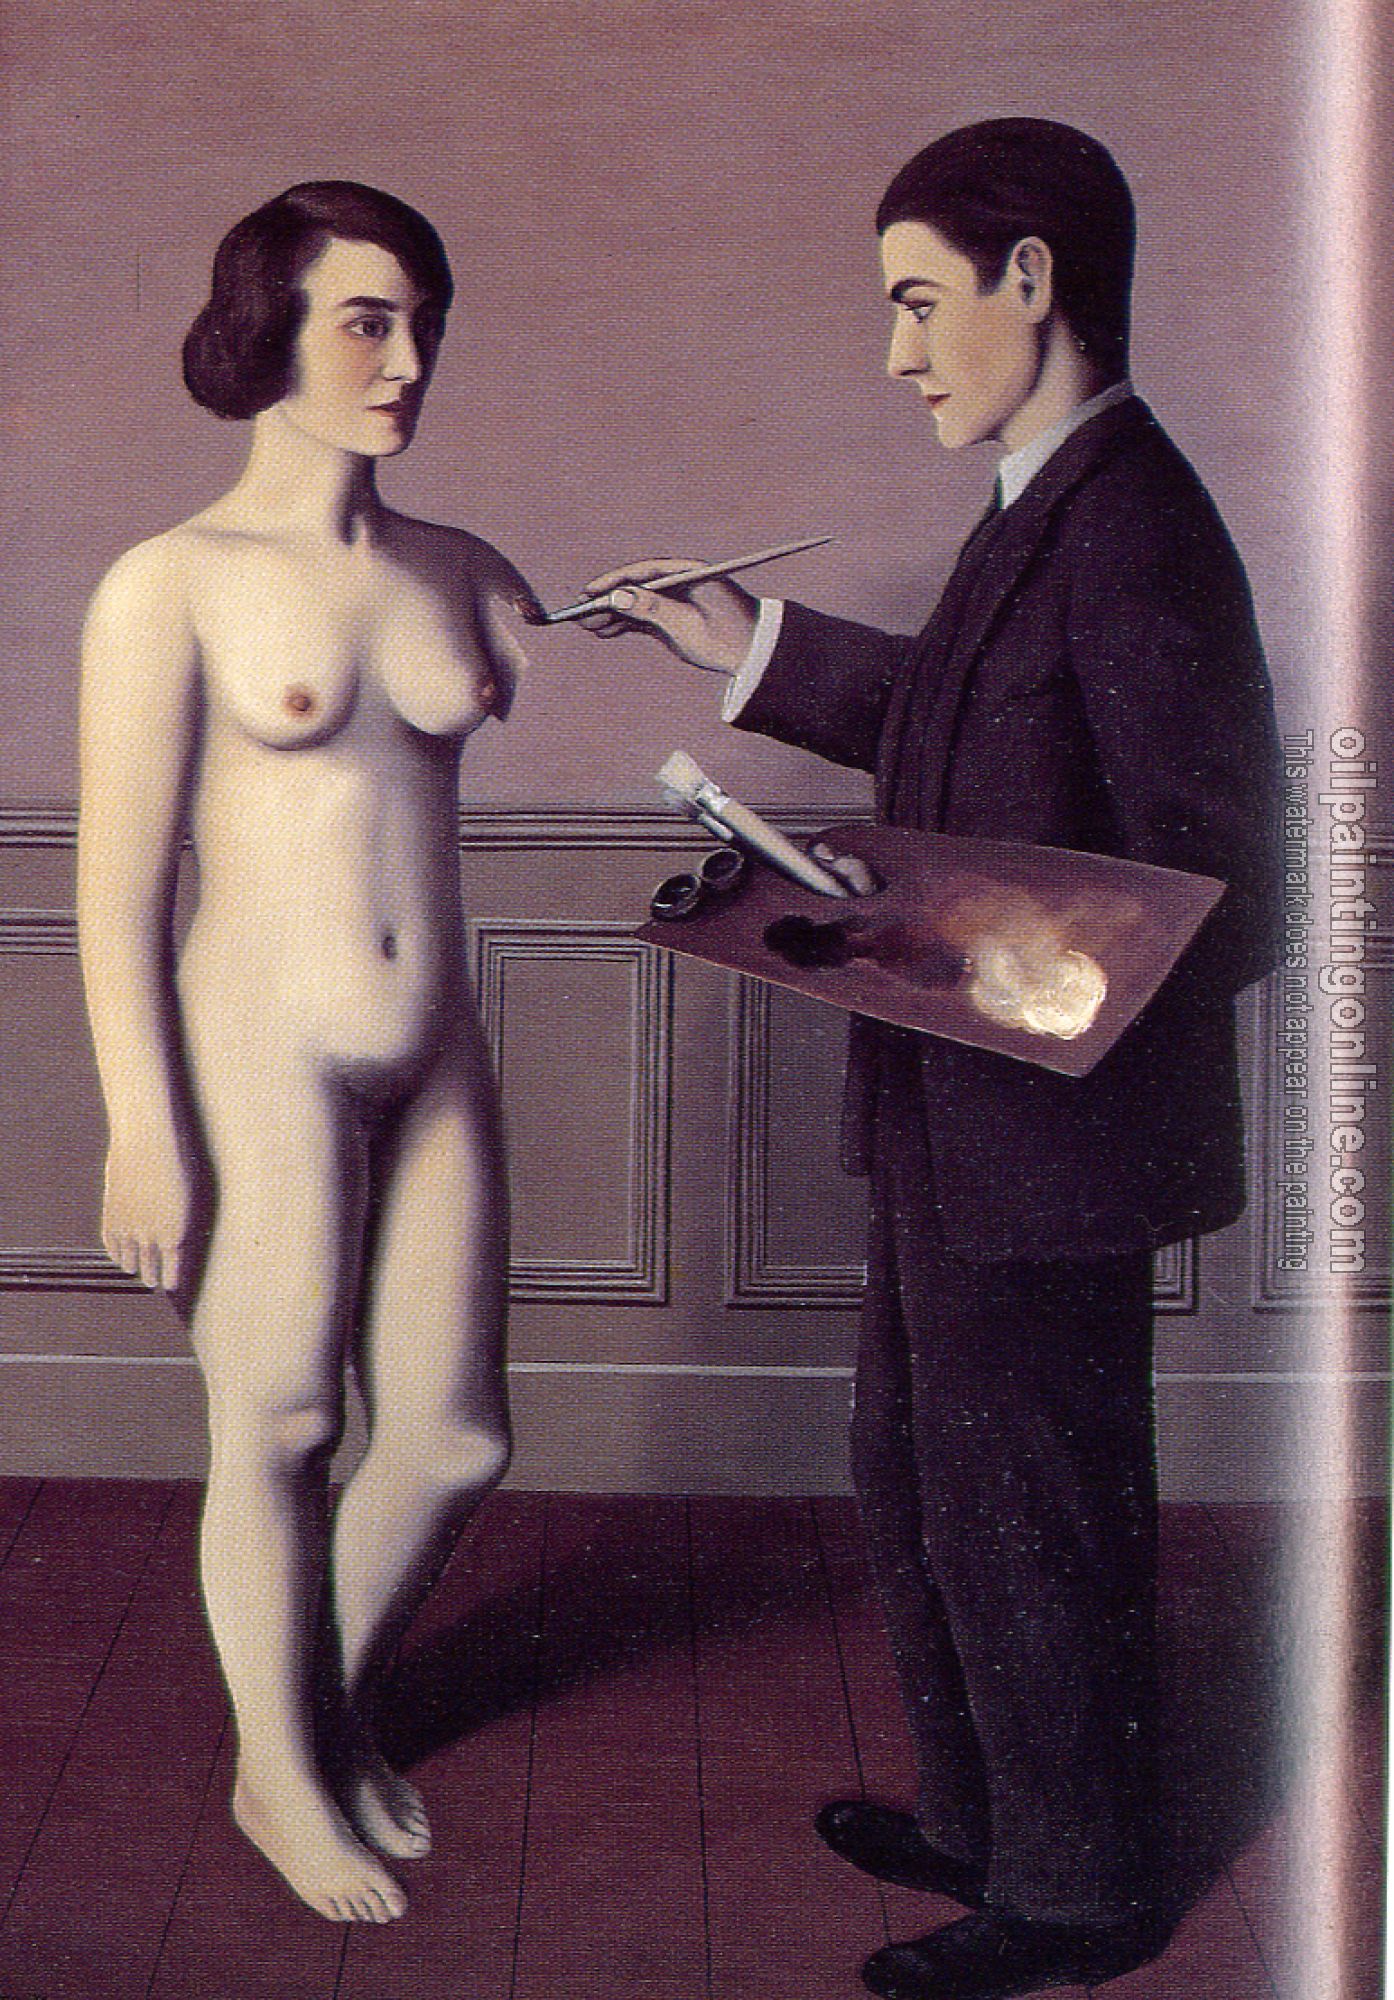 Magritte, Rene - attempting the impossible